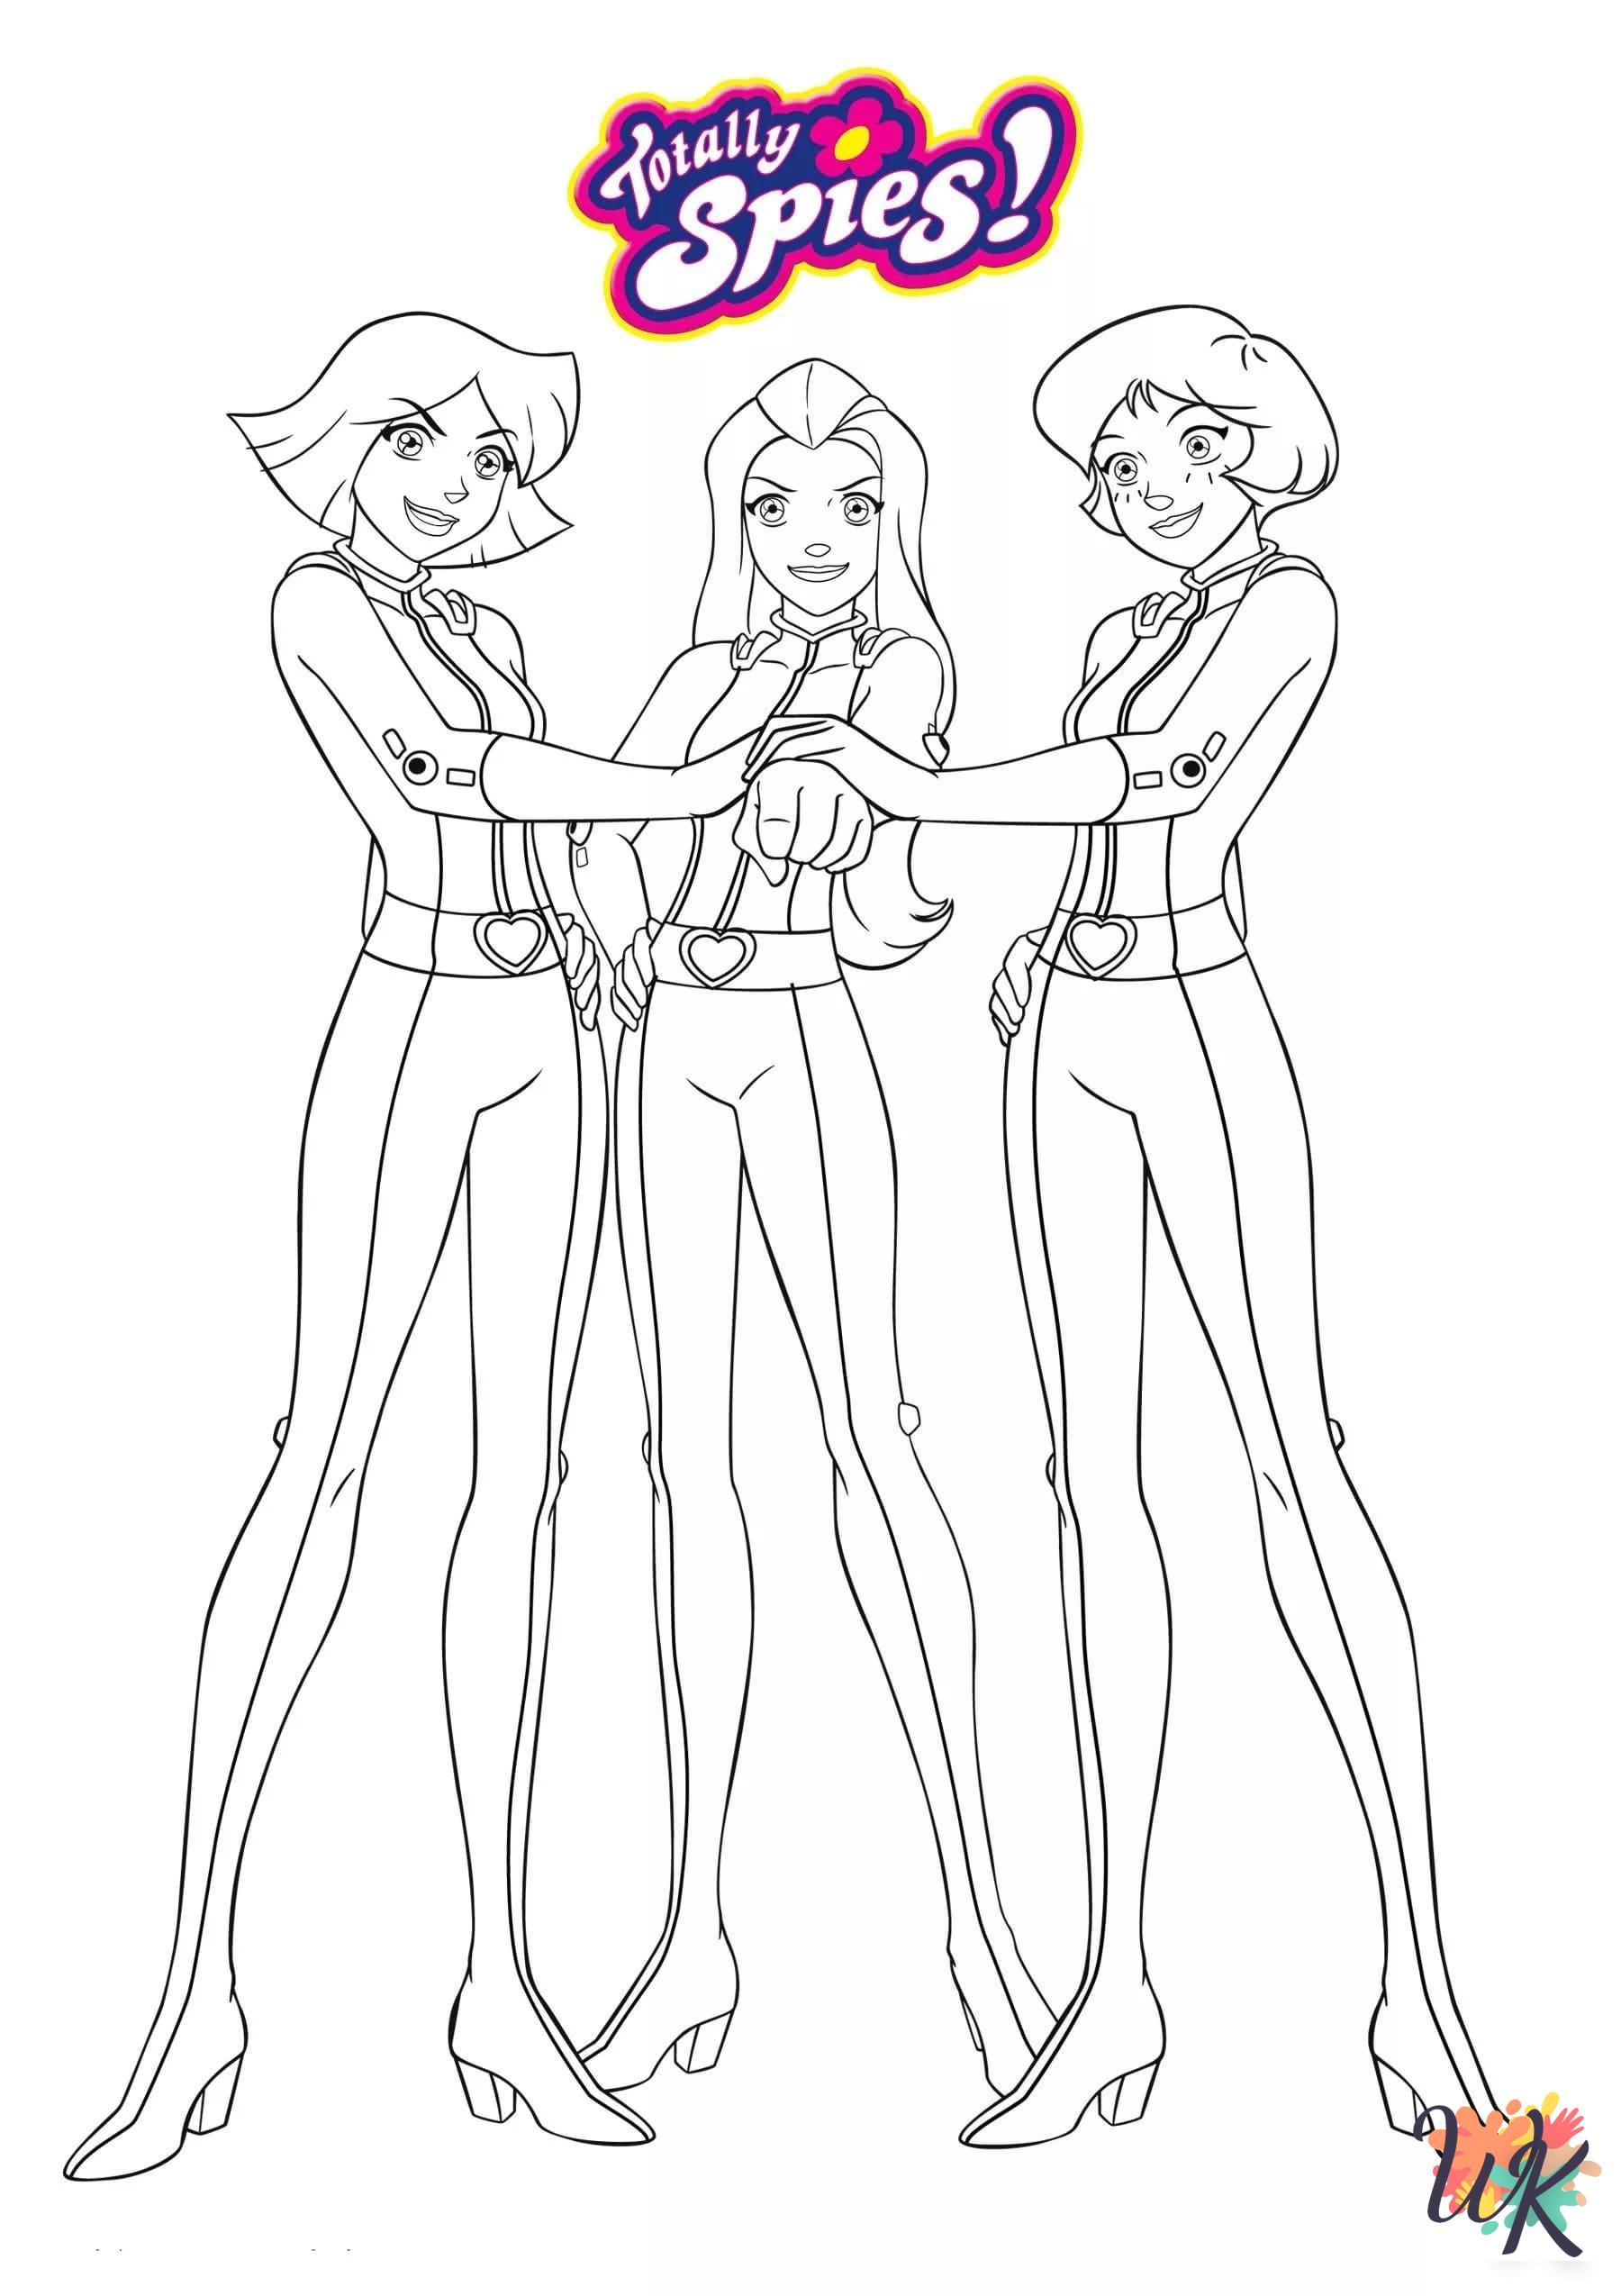 kids Totally Spies coloring pages